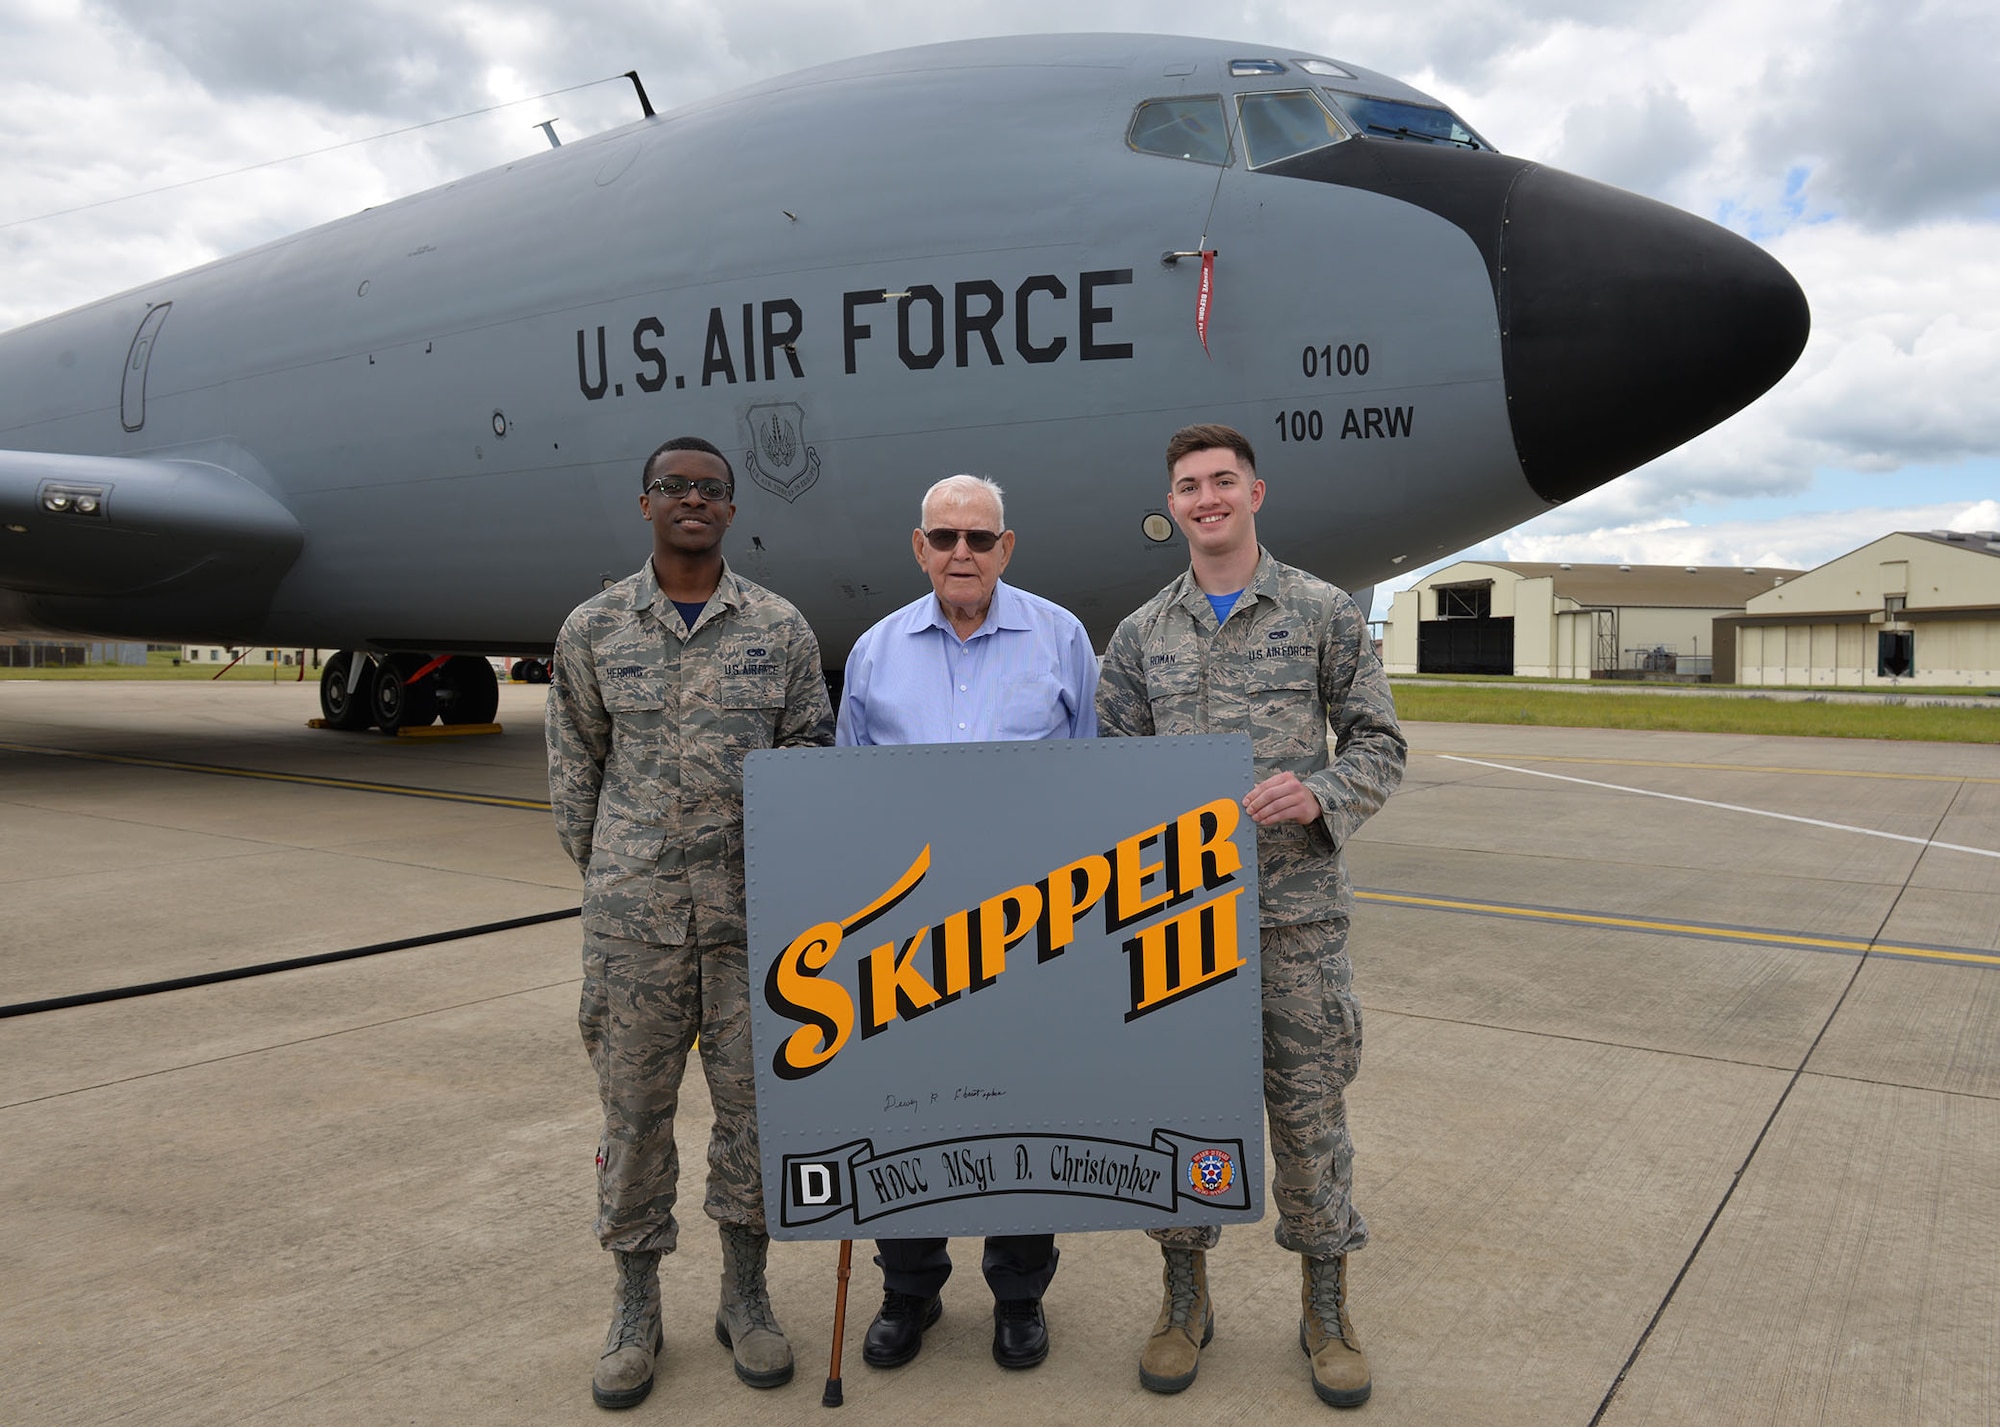 U.S. Air Force Airman 1st Class Isaiah Herring, left, former 100th Aircraft Maintenance Squadron maintainer, and Airman Camden Roman, former 100th Maintenance Squadron maintainer, pose for a photo with retired Master Sgt. Dewey Christopher, a former 351st Bomb Squadron crew chief, 100th Bombardment Group and World War II veteran, during the veteran’s visit to Royal Air Force Mildenhall, England, June 21, 2019. Christopher visited the base to attend a renaming ceremony of the Professional Development Center in his honor. He passed away in October 2019. (U.S. Air Force photo by Karen Abeyasekere)